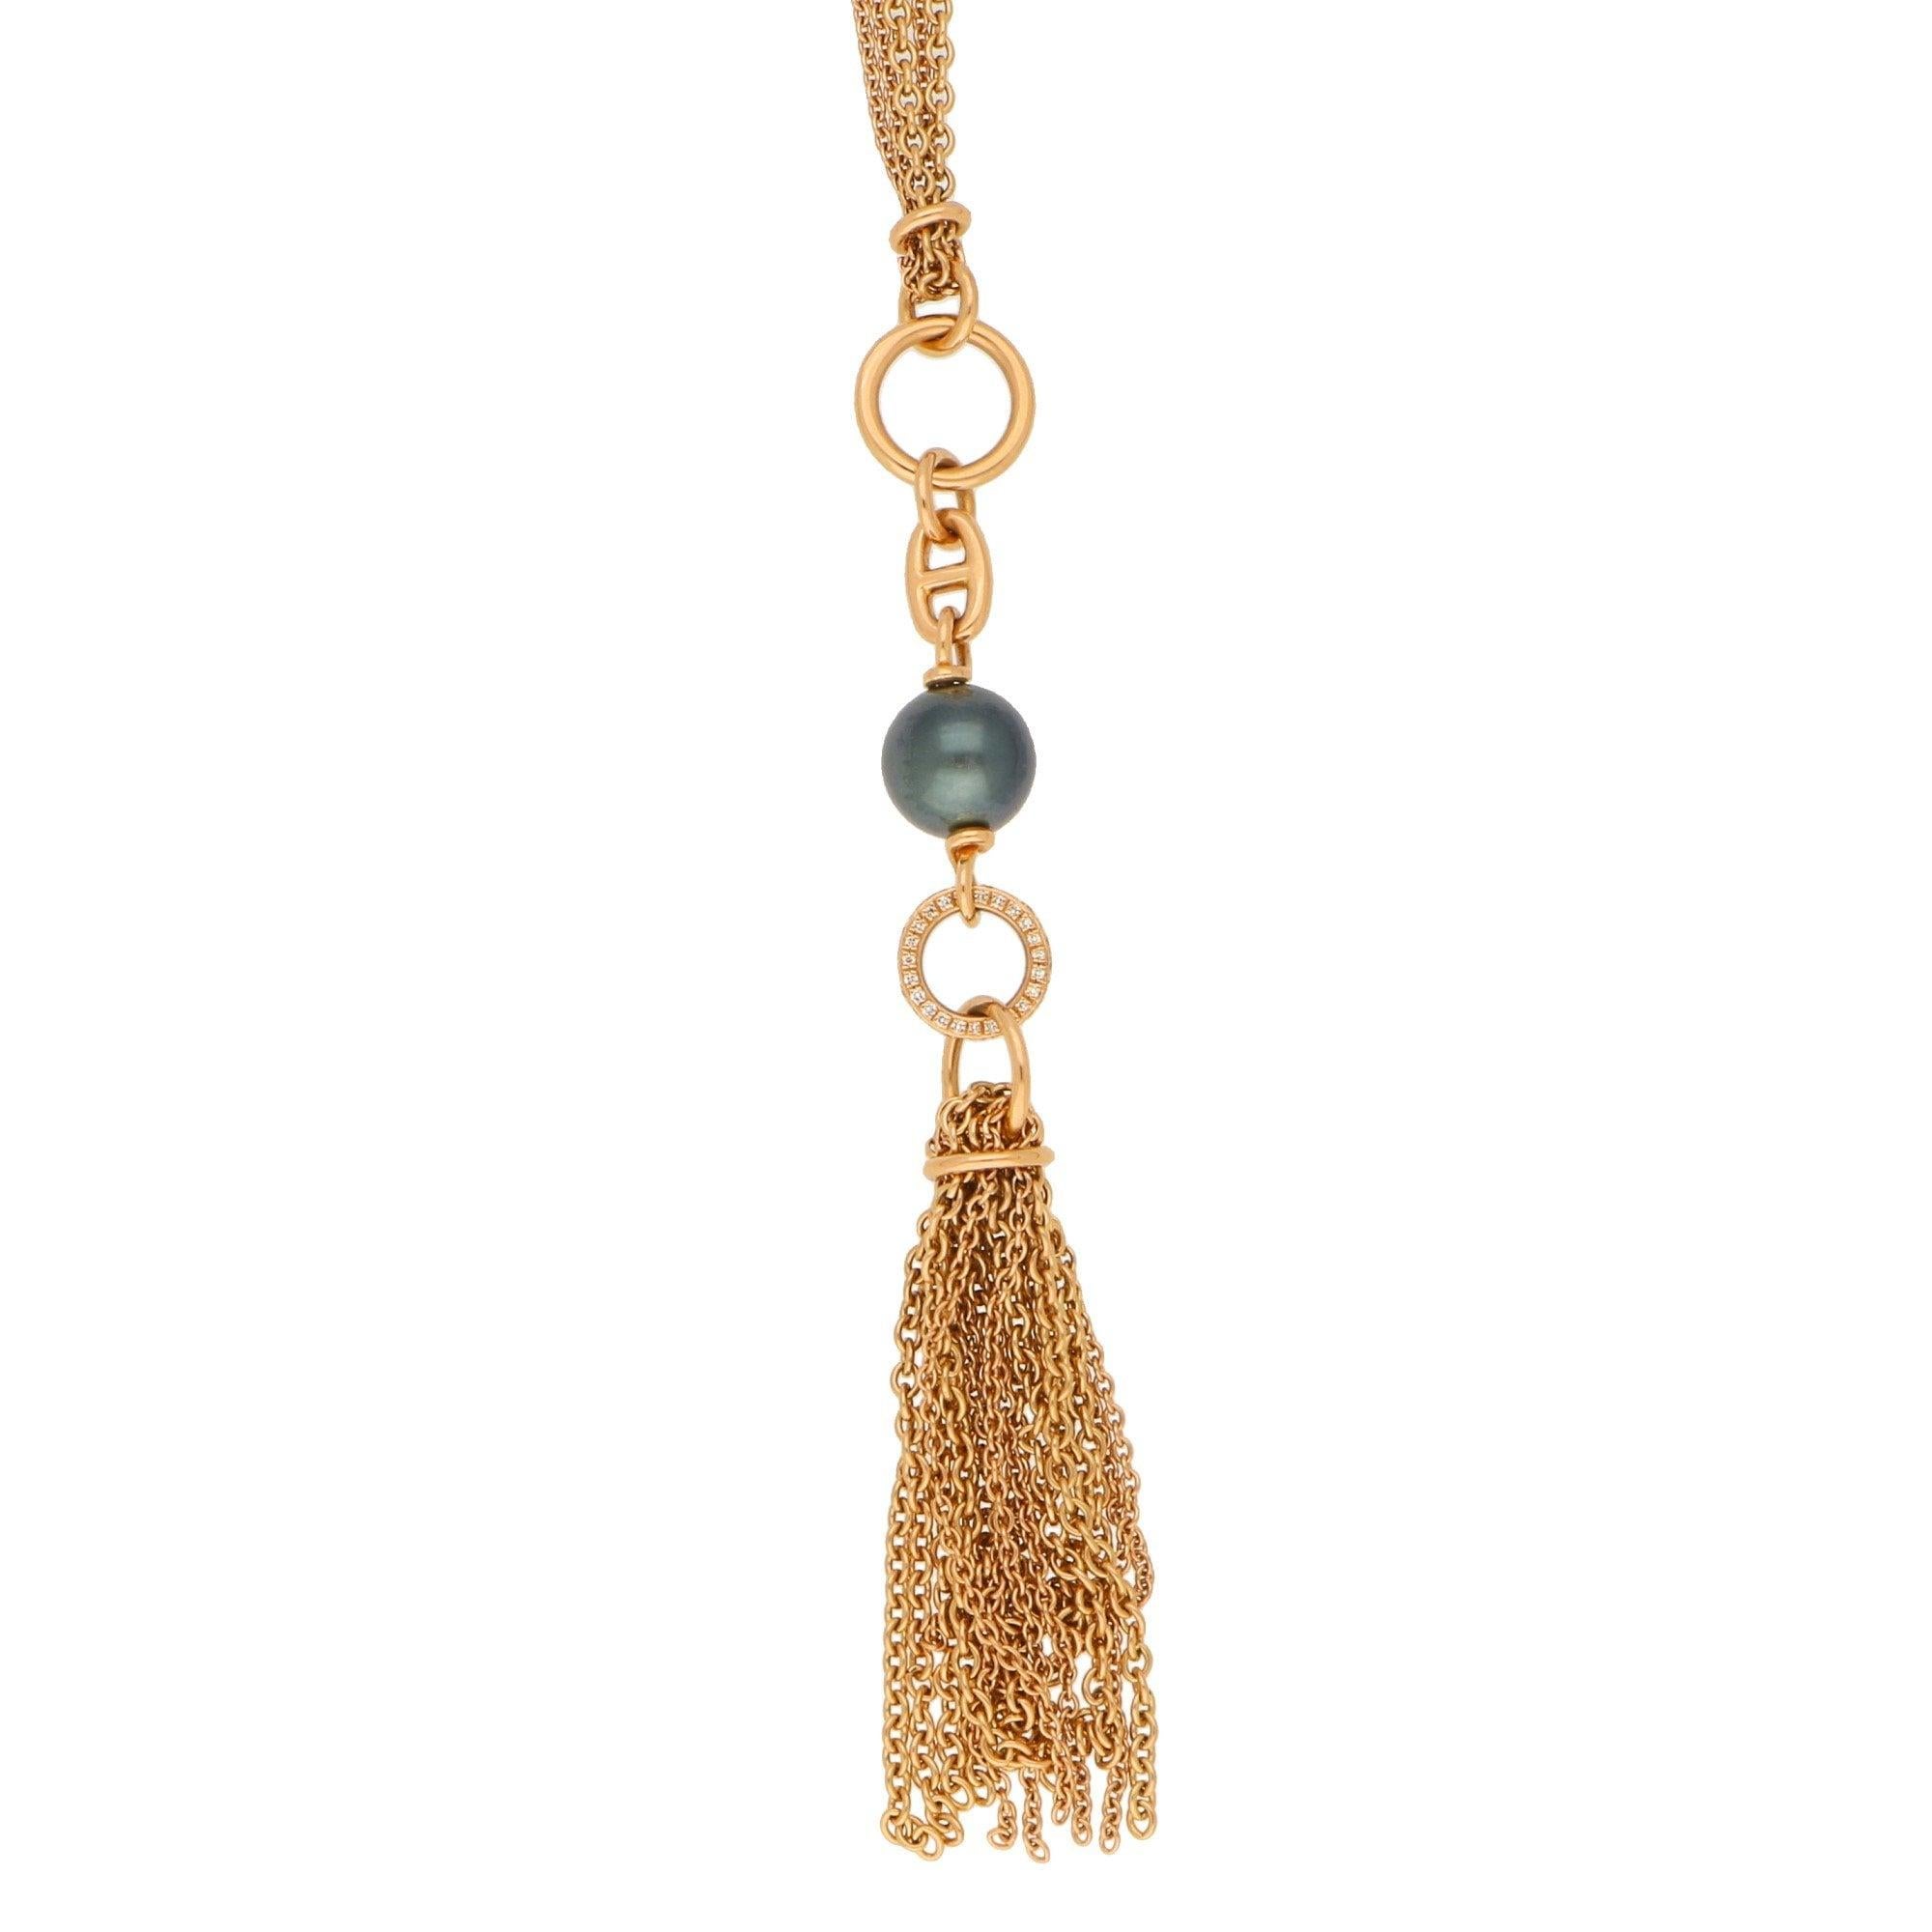 Pearl approximately 9.5mm. Diamonds approximately 0.19 carats in total. 
A vintage Hermes Chain d'Ancre black pearl and diamond tassel sautoir necklace in 18-karat rose gold. 
The necklace's centre piece features a dark grey pearl below a classic